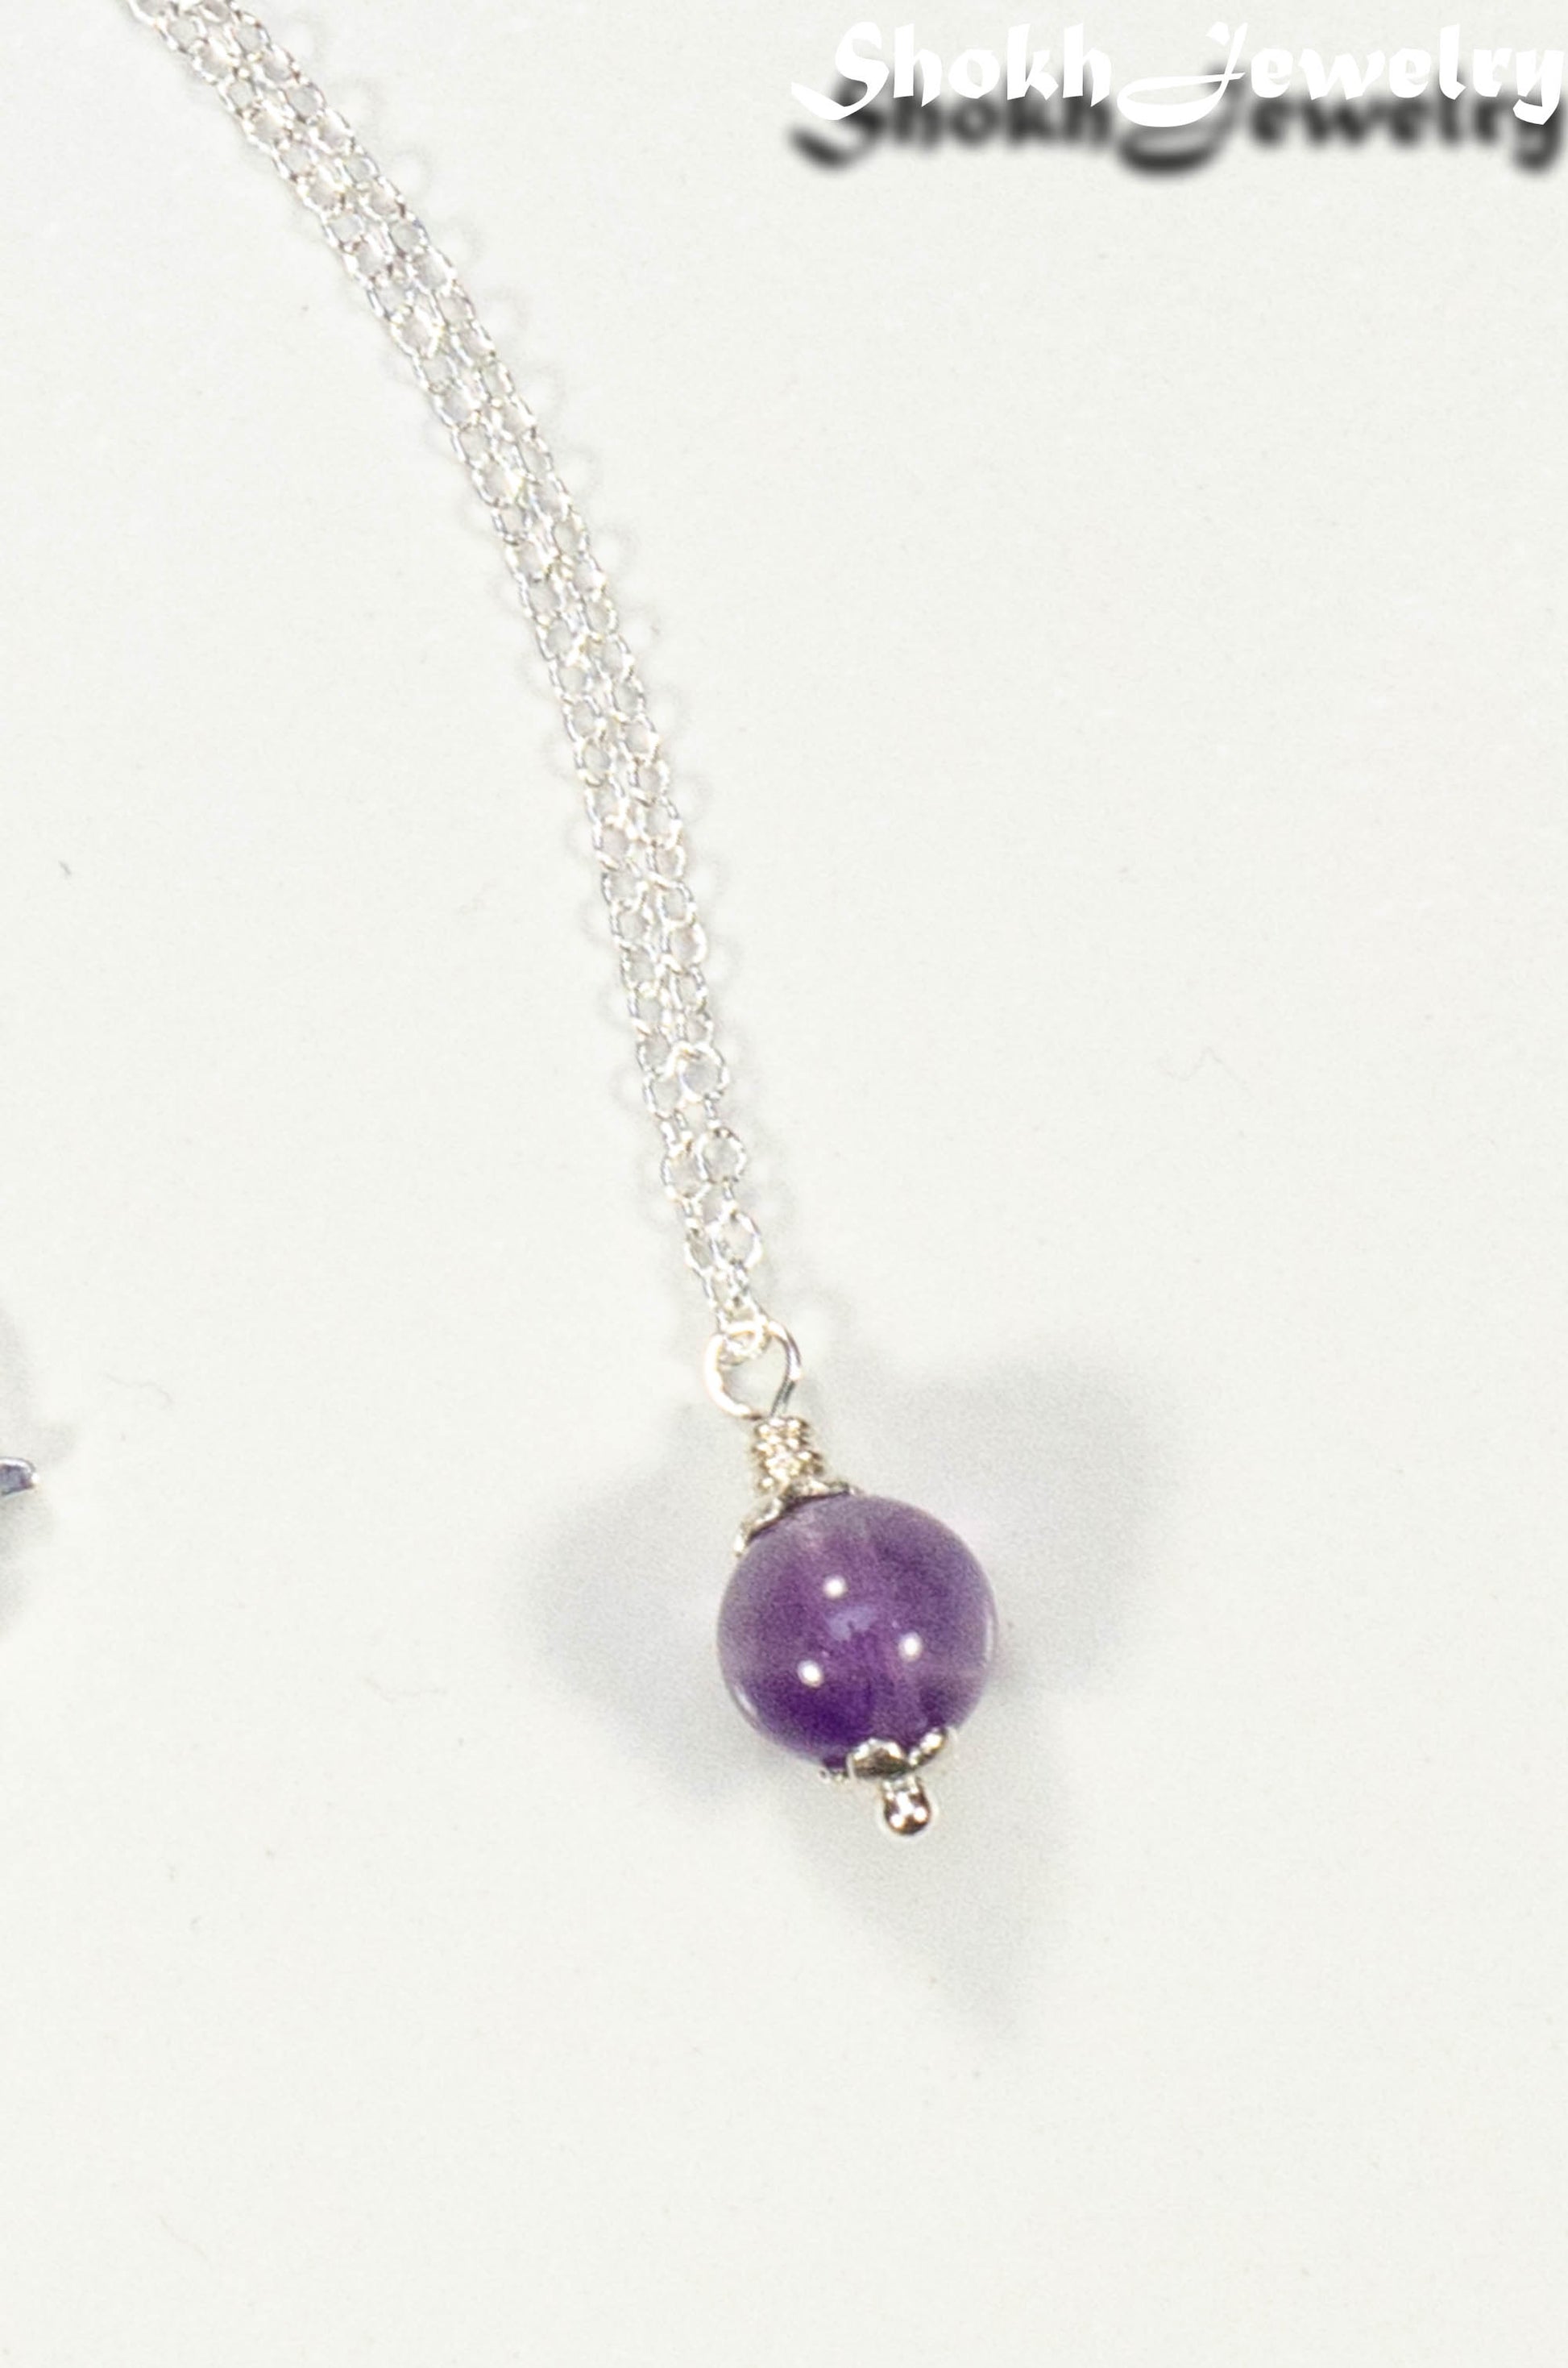 Close up of a Dainty Amethyst Choker Necklace